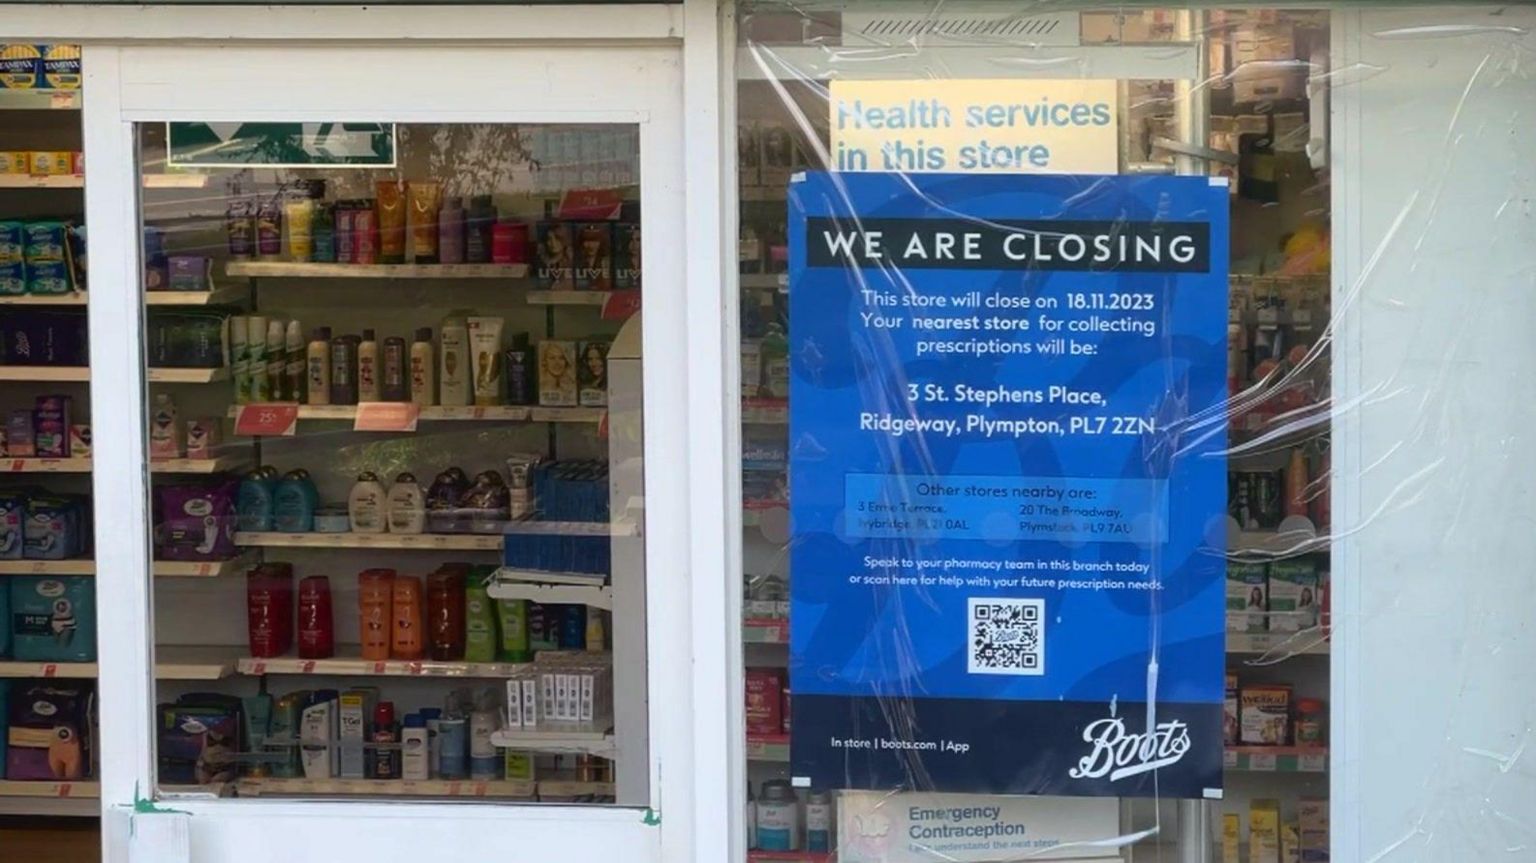 Boots chemist closing sign in street